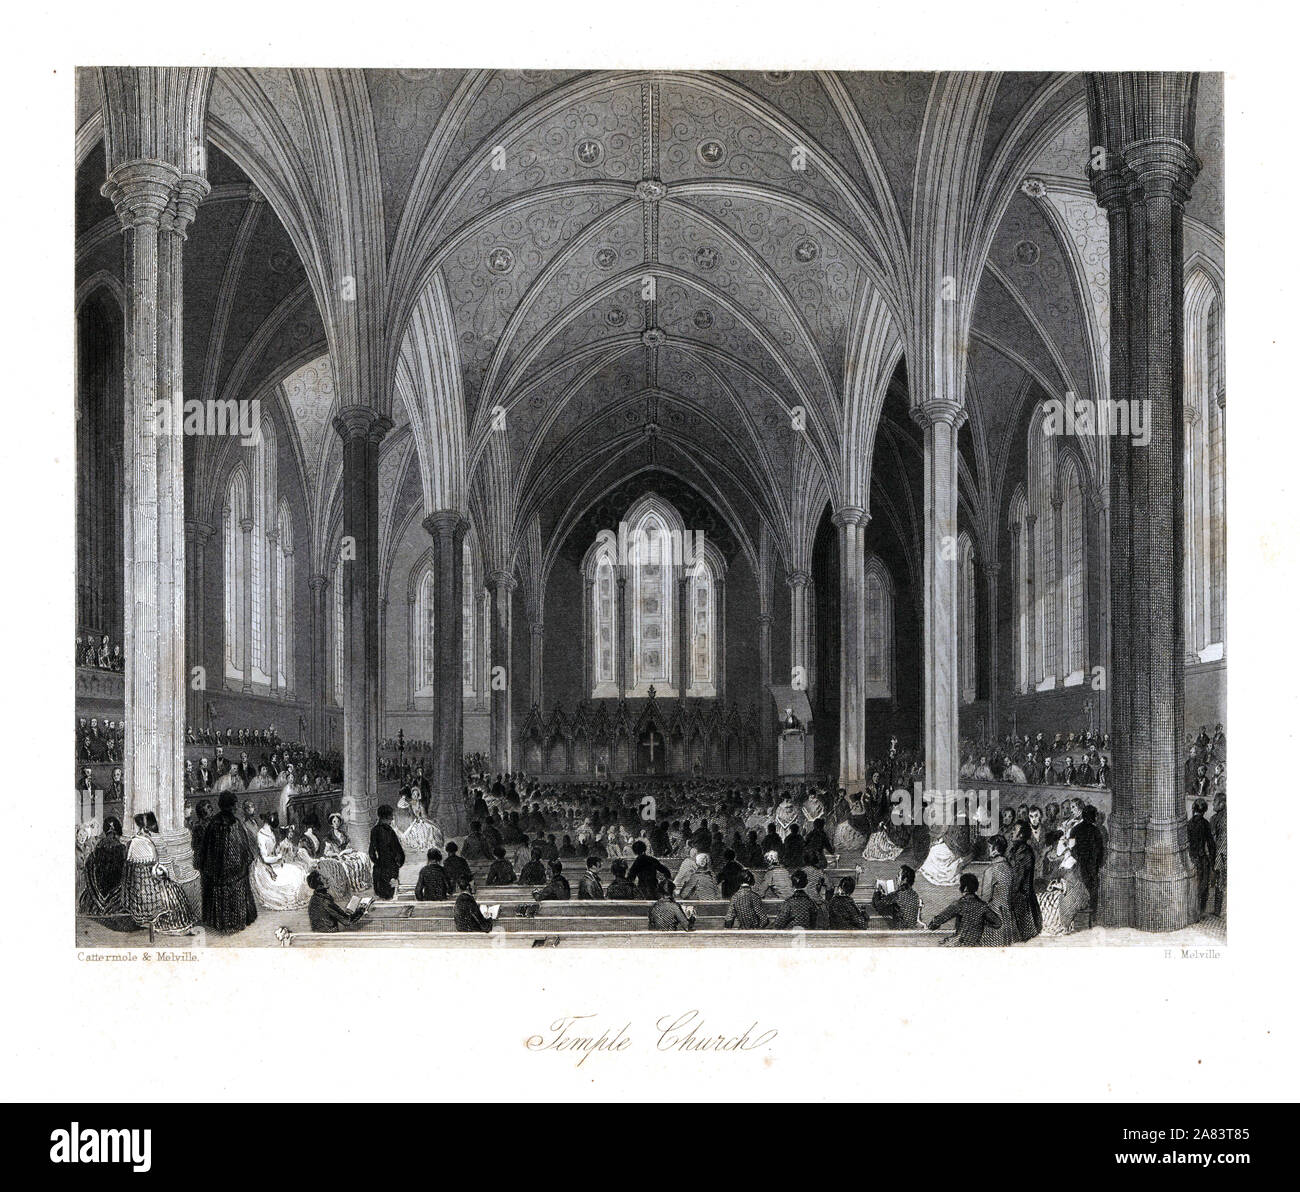 Vaulted ceiling and stained-glass windows in Temple Church. Steel engraving by Henry Melville after an illustration by George Cattermole and Henry Melville from London Interiors, Their Costumes and Ceremonies, Joshua Mead, London, 1841. Stock Photo